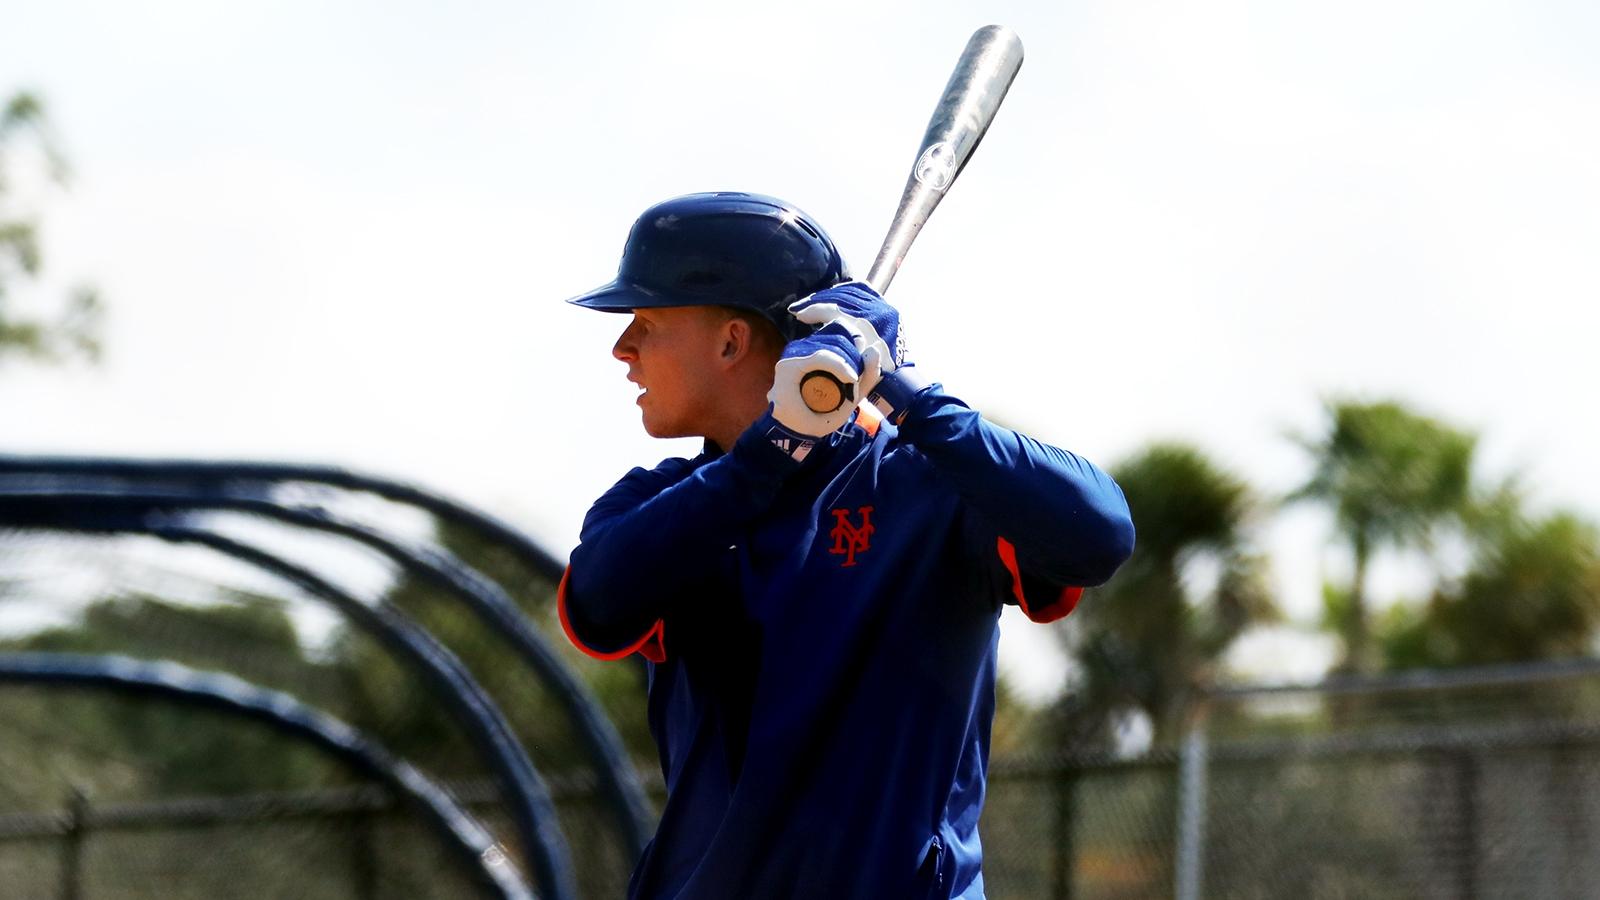 Mets prospect Pete Crow-Armstrong batting at 2021 spring training in Port St. Lucie, Fla. / Rob Carbuccia/SNY